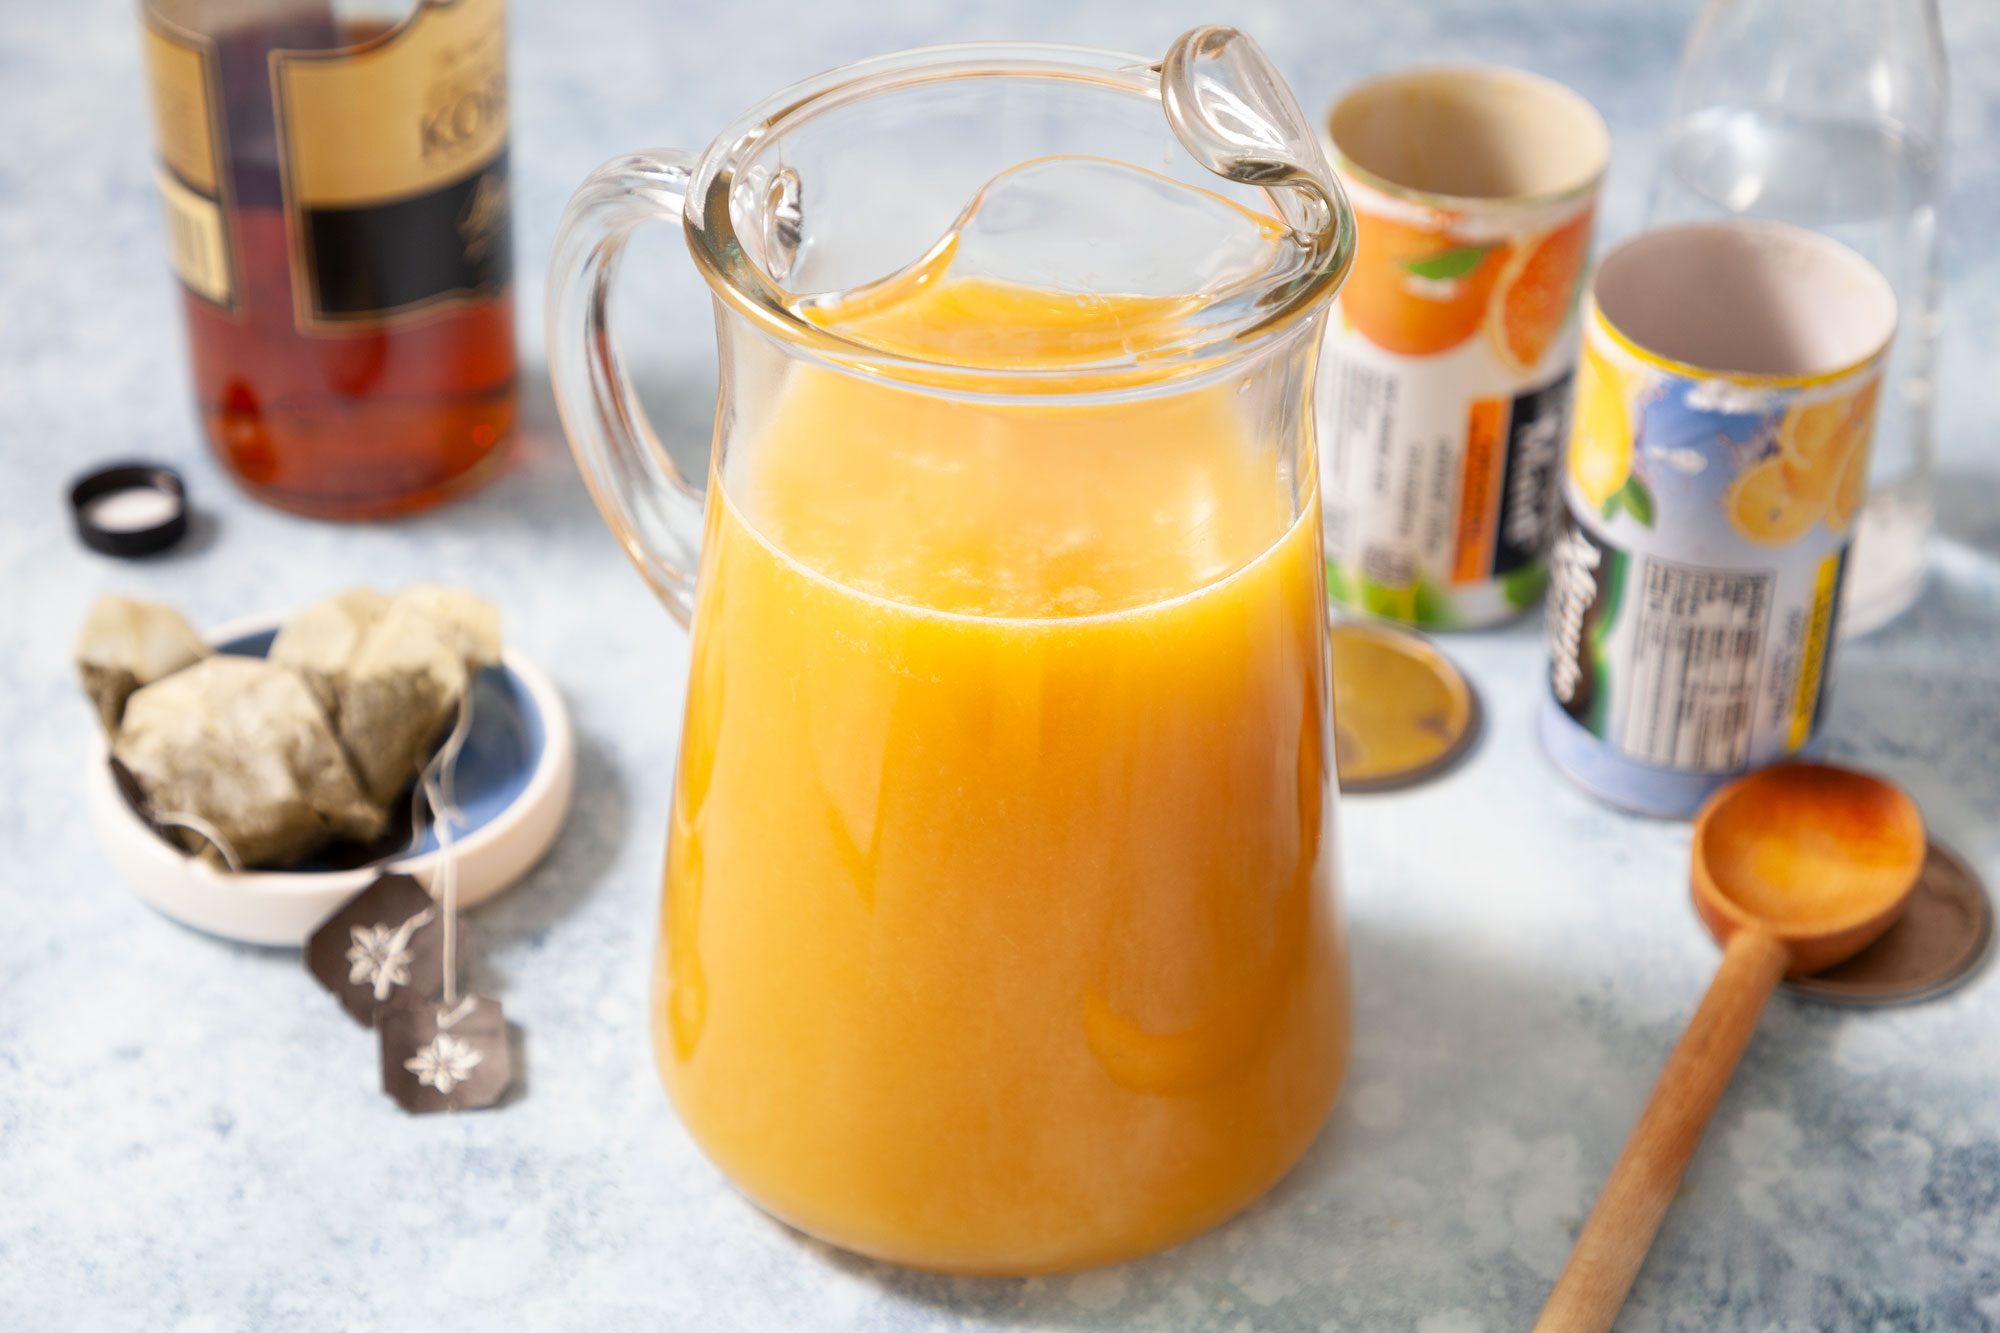 A Pitcher Full of Orange Juice and Brandy Mix